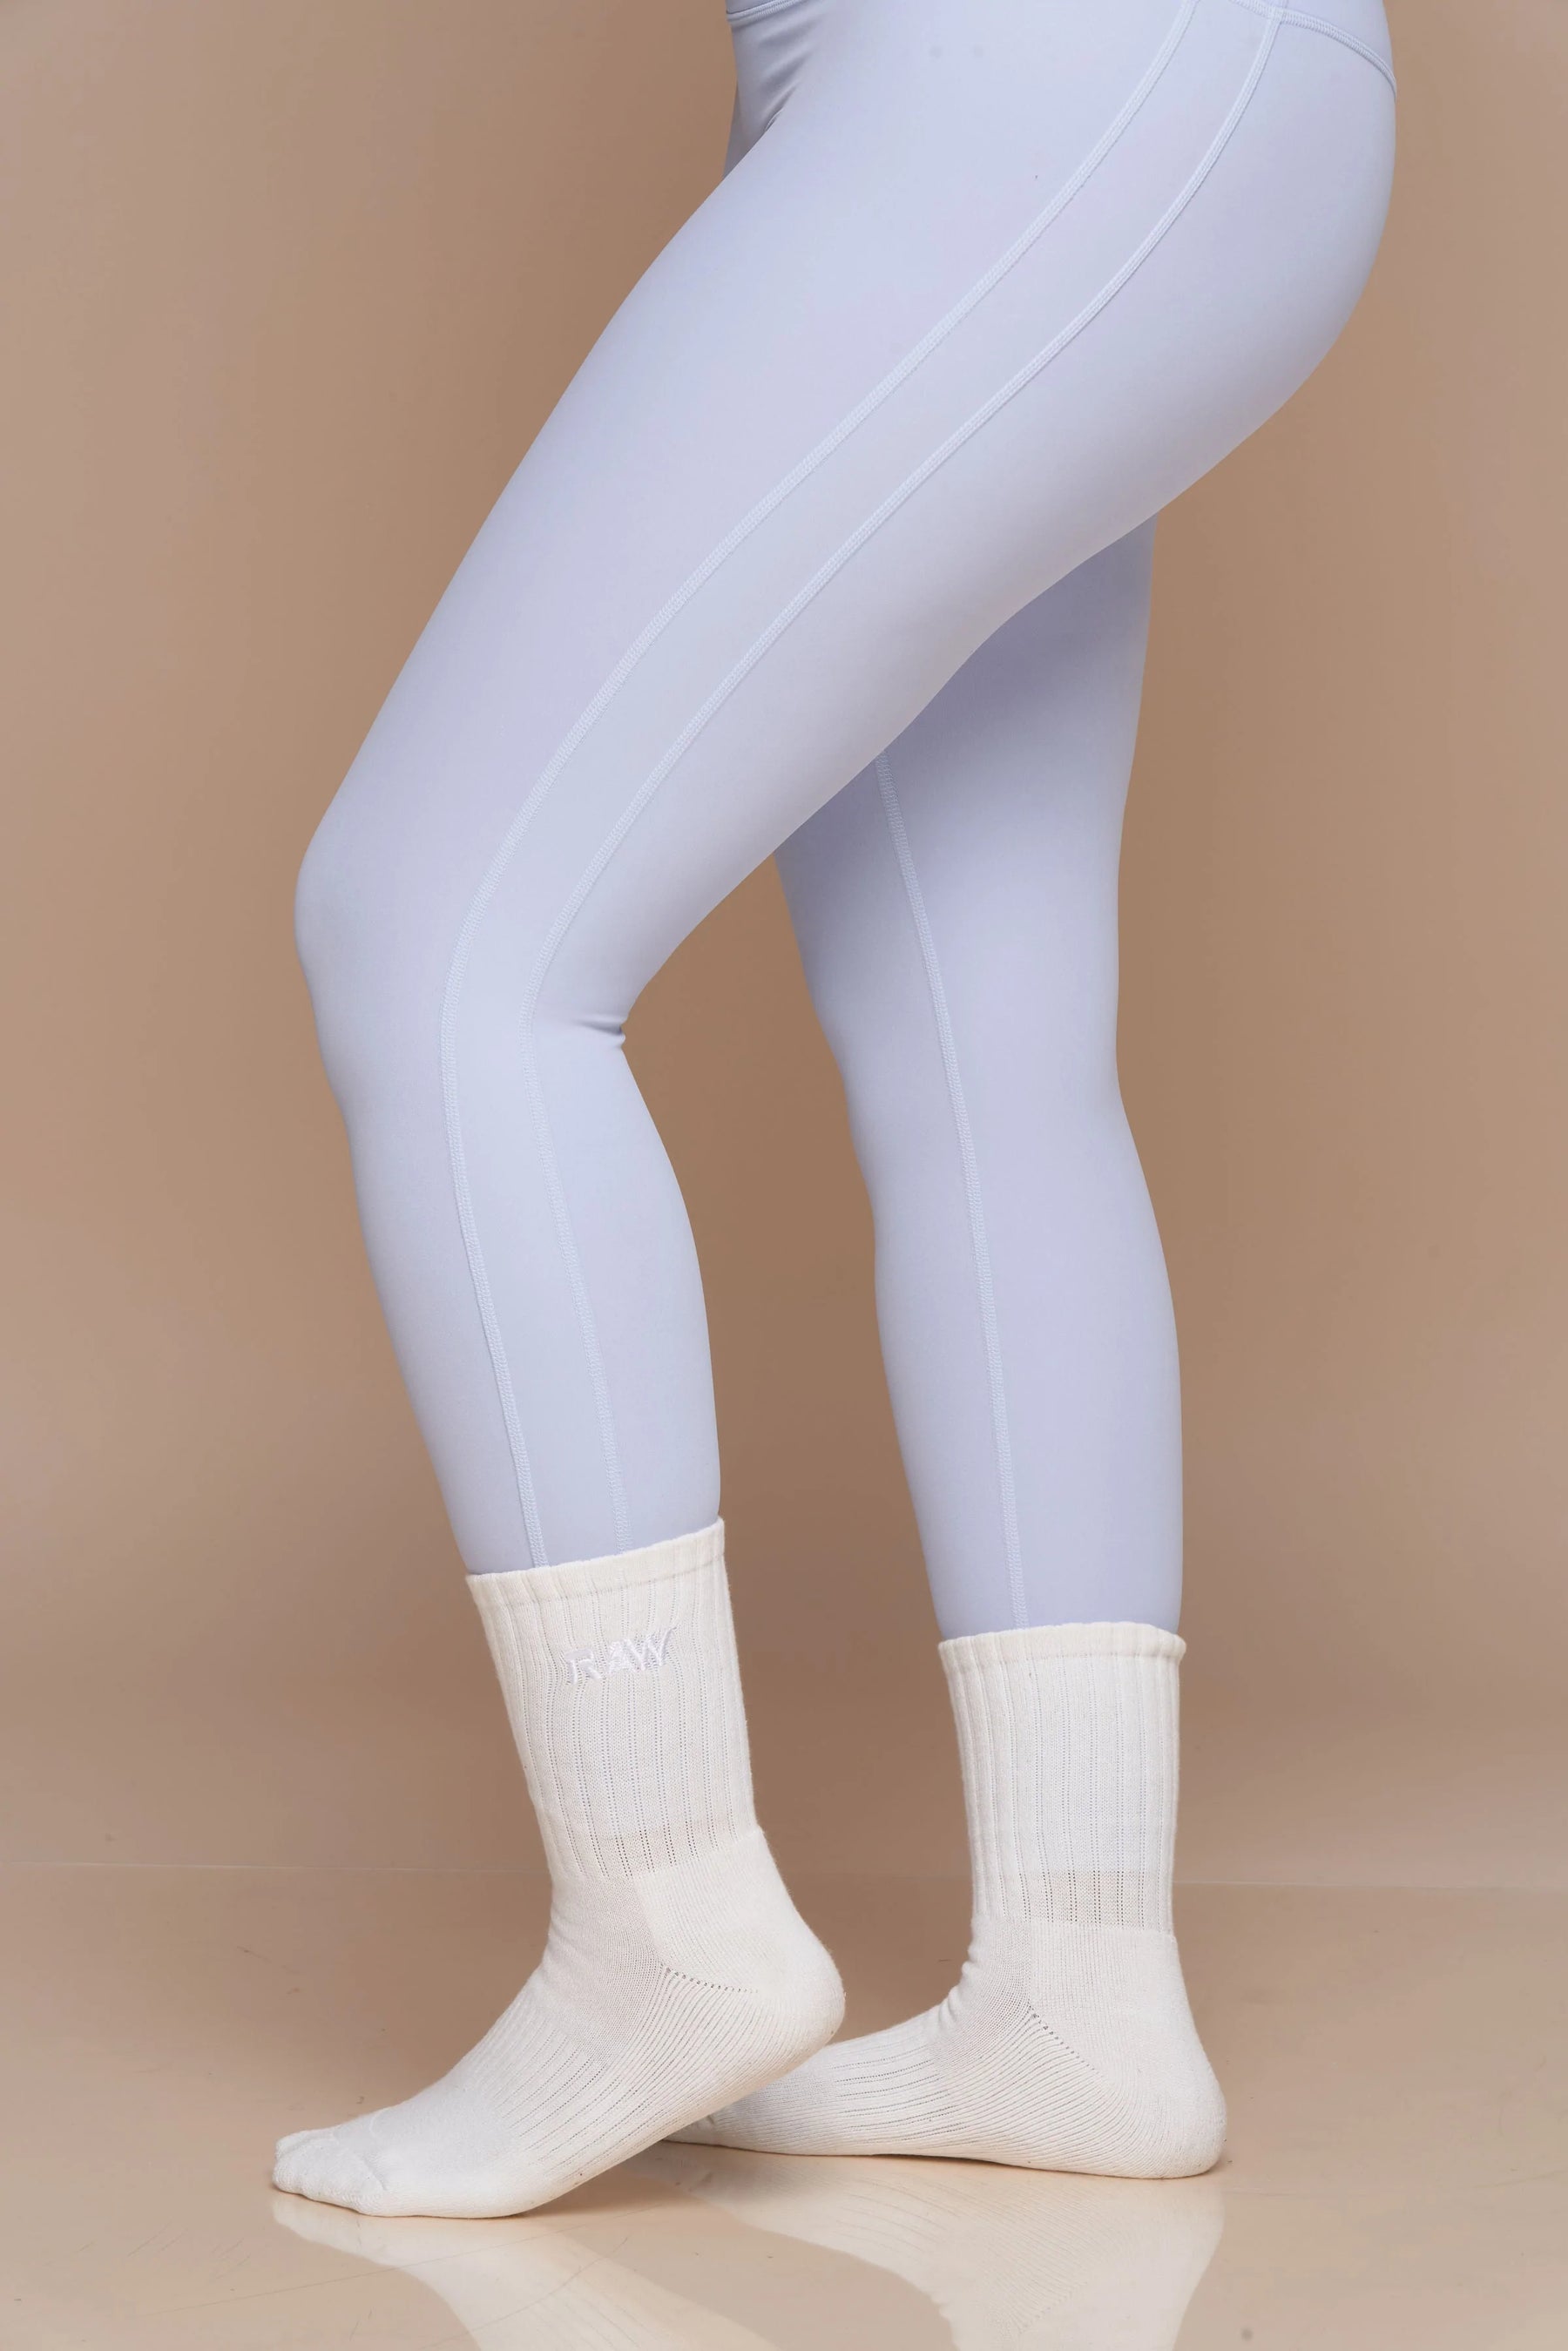 Get Committed (Baby Blue) Leggings